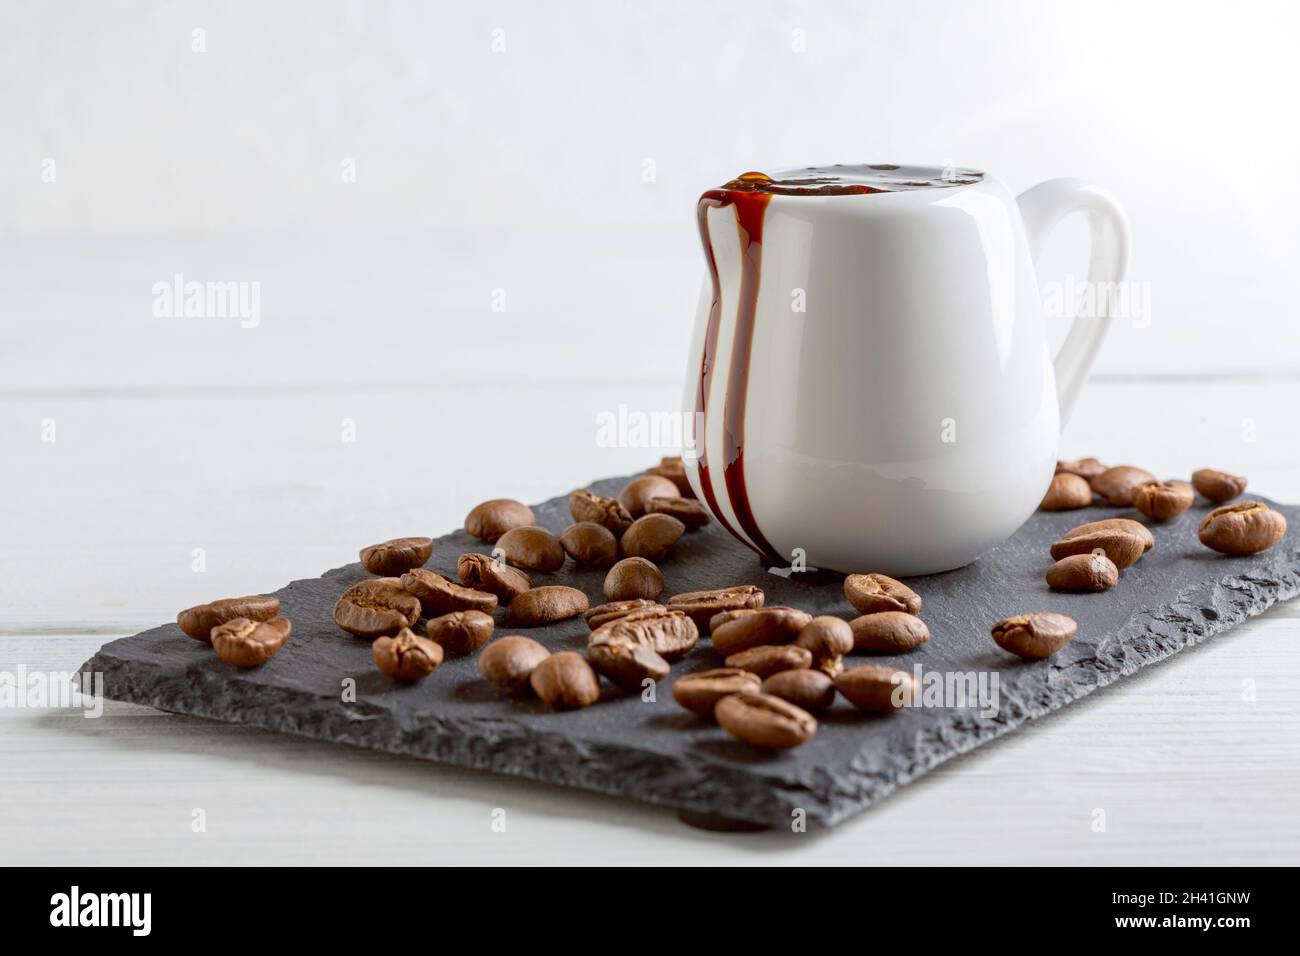 Coffee extract in a porcelain jug. Stock Photo